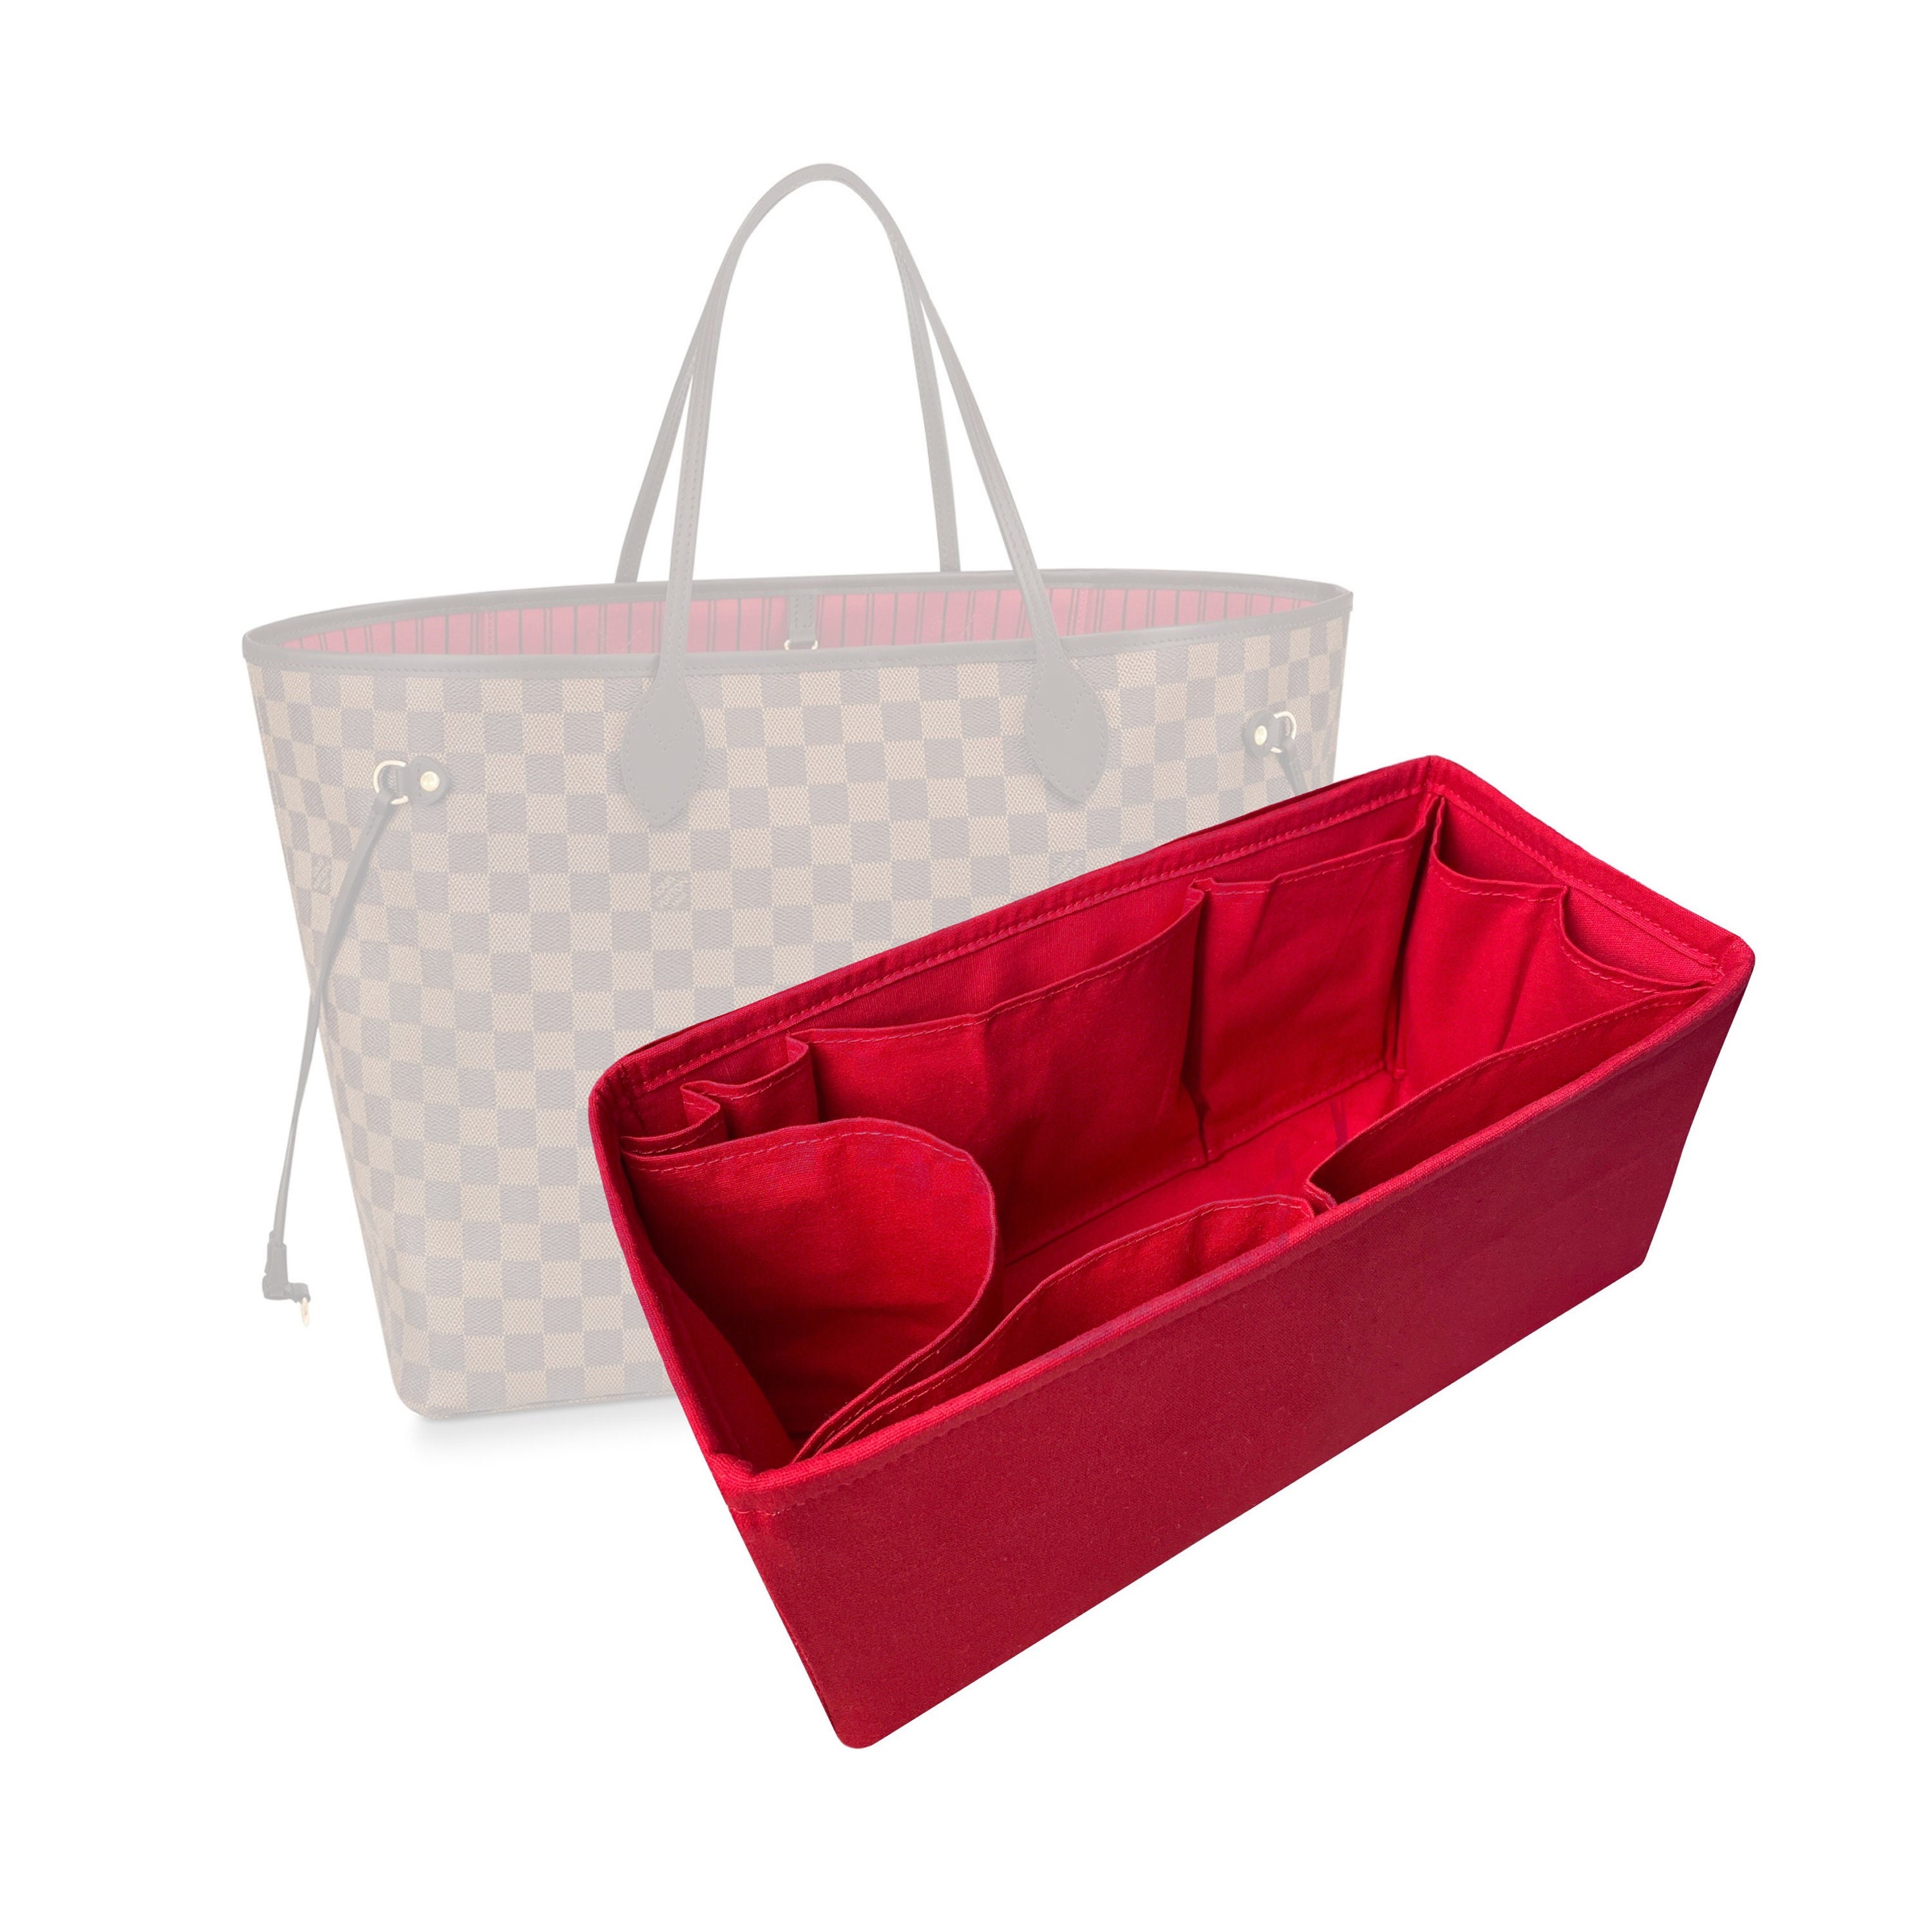 Purse Bling Neverfull GM Base Shaper, Bag Shaper for LV Never Full Bags and Other LV Totes, Vegan Leather (Red, gm)